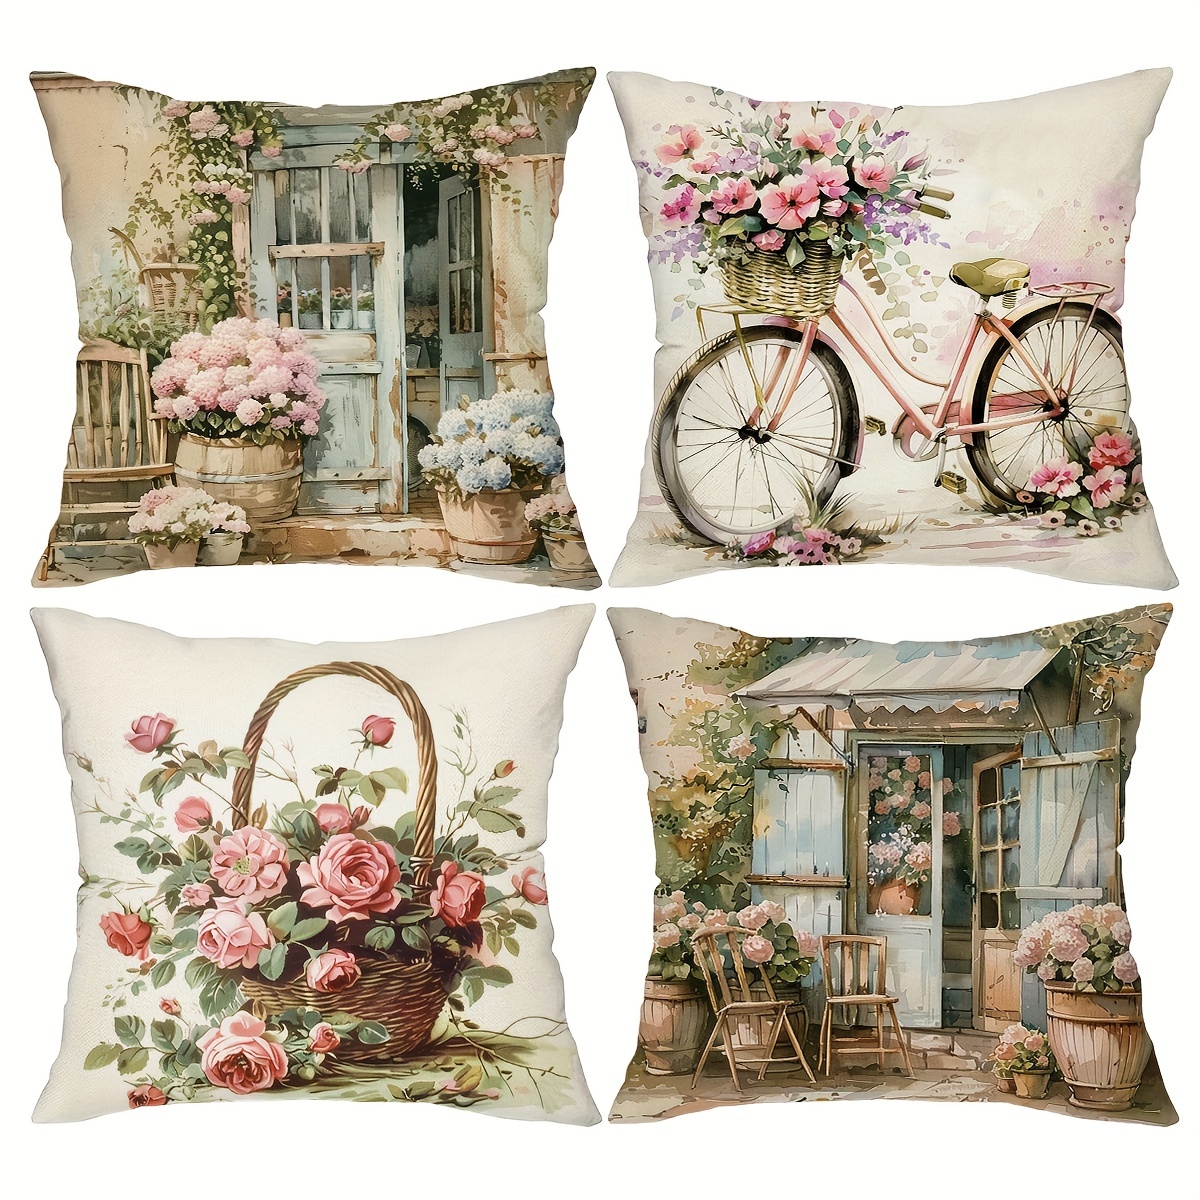 

Rustic Floral Throw Pillow Covers: 4 Pieces, 18in X 18in, Cozy Farmhouse Decor, Linen Blend, Hidden Zipper Design, Suitable For Porch, Patio, Couch, Sofa, Living Room, Outdoor Use